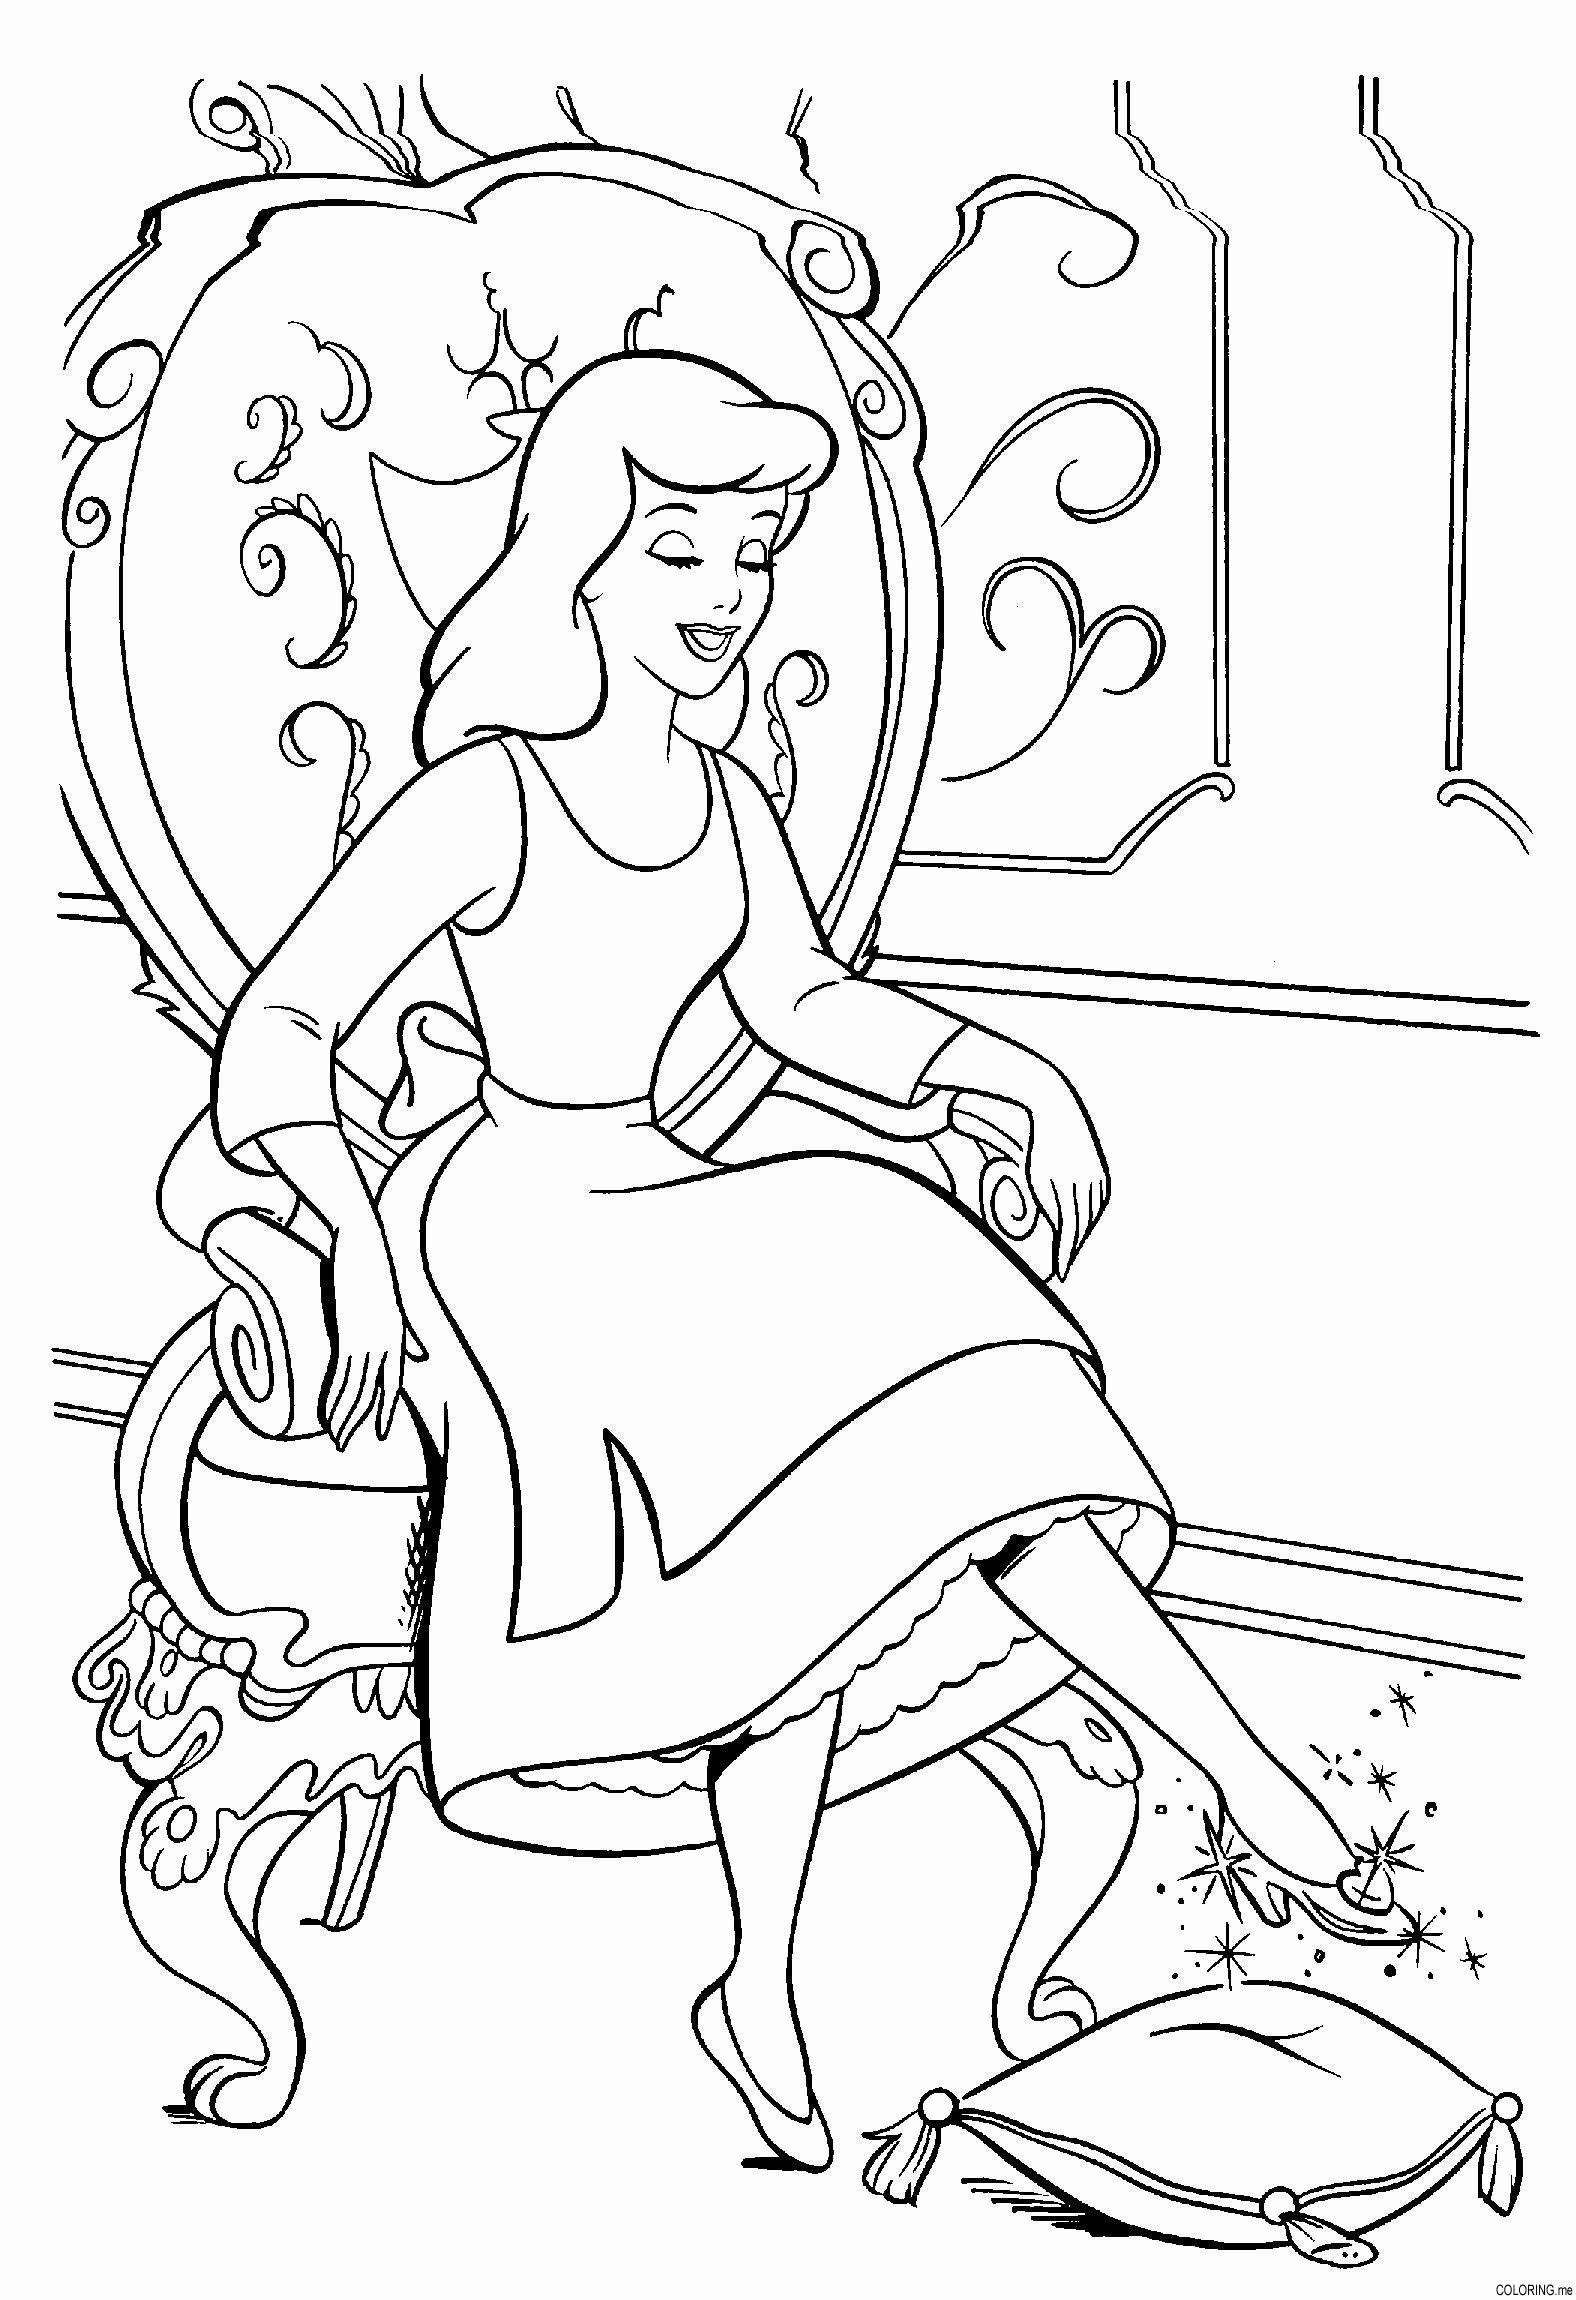 Disney Princess Coloring Book New New Dress Up Coloring Pages to Print 76a5f O D the Free